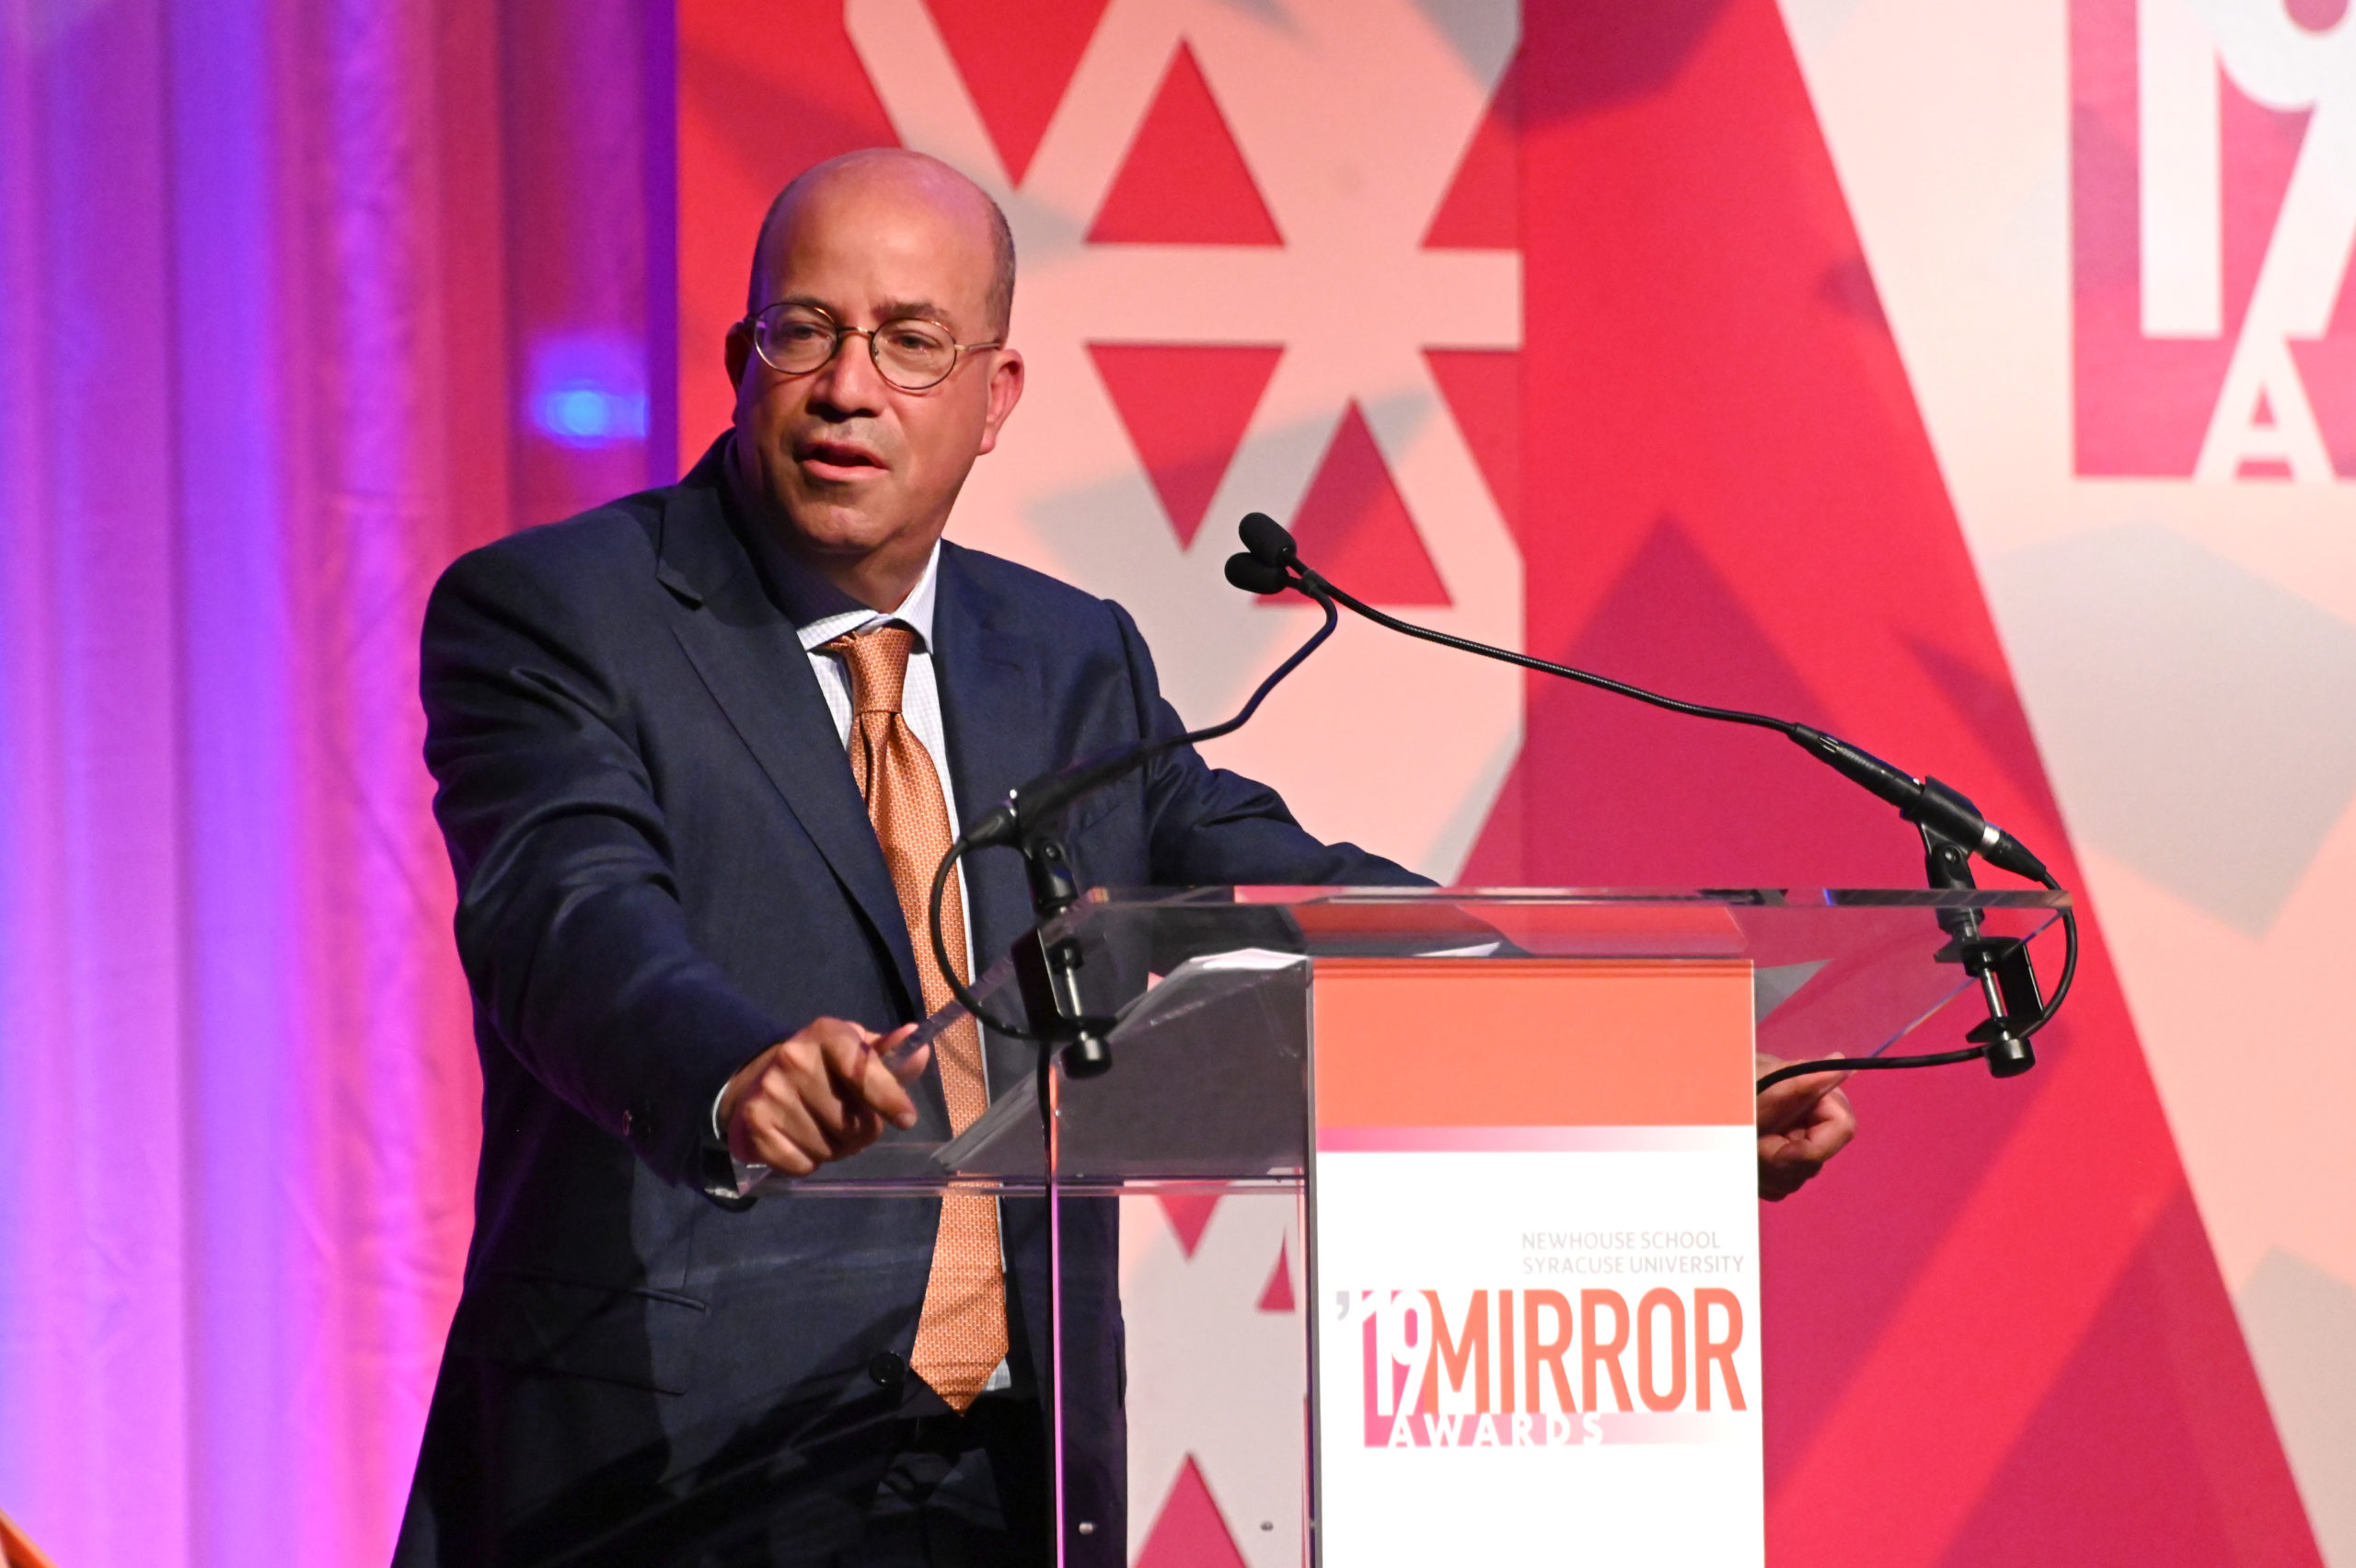 President CNN Worldwide, Jeff Zucker speaks at the 2019 Mirror Awards at Cipriani 42nd Street on June 13, 2019 in New York City. (Mike Coppola/Getty Images)